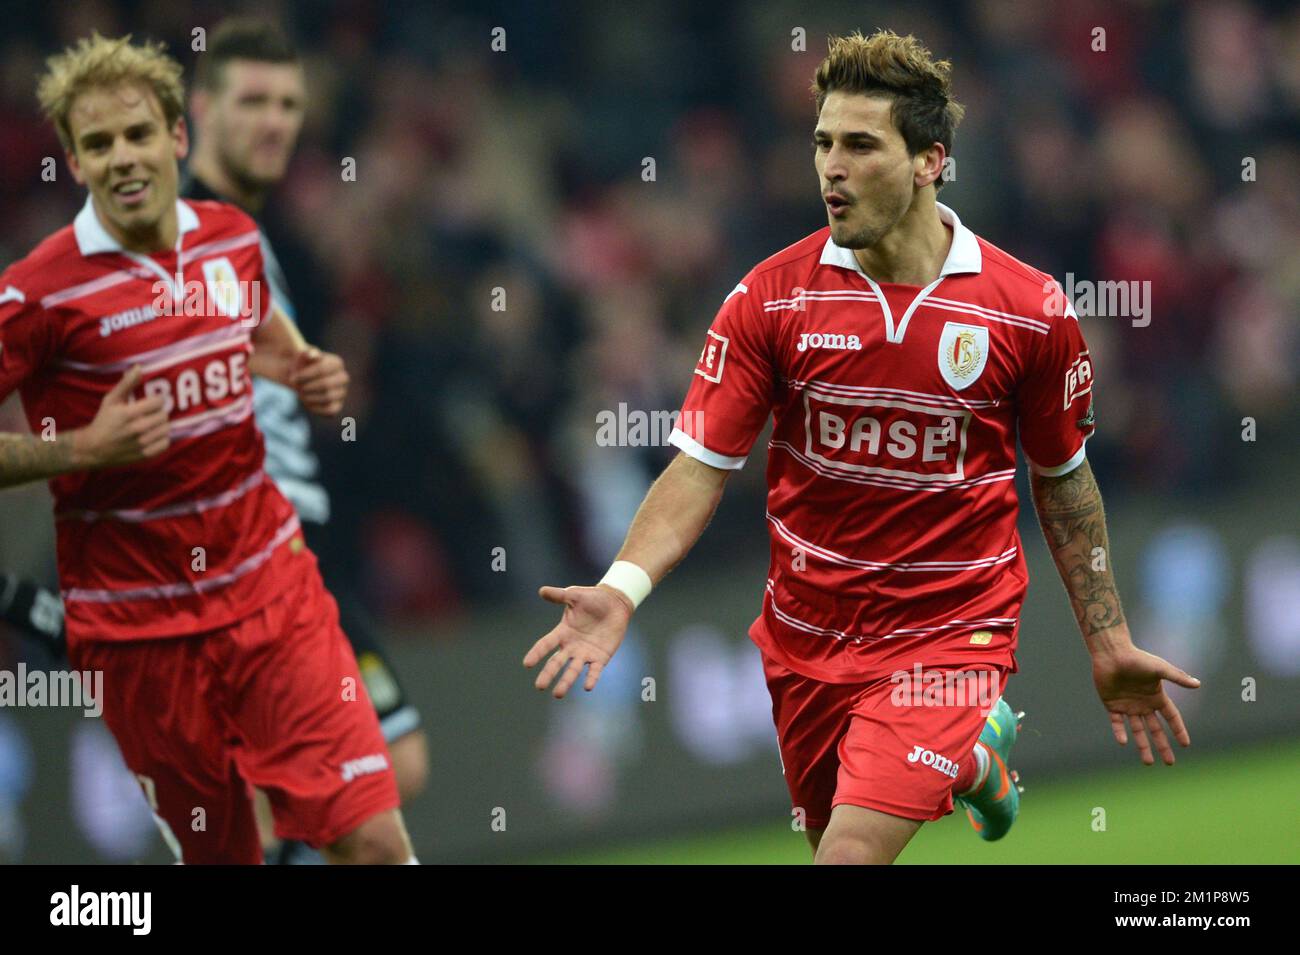 20121207 - LIEGE, BELGIUM: Standard's Maor Bar Buzaglo celebrates after scoring the 3-0 goal during the Jupiler Pro League match between Standard and Charleroi, in Liege, Friday 07 December 2012, on day 19 of the Belgian soccer championship. BELGA PHOTO YORICK JANSENS Stock Photo